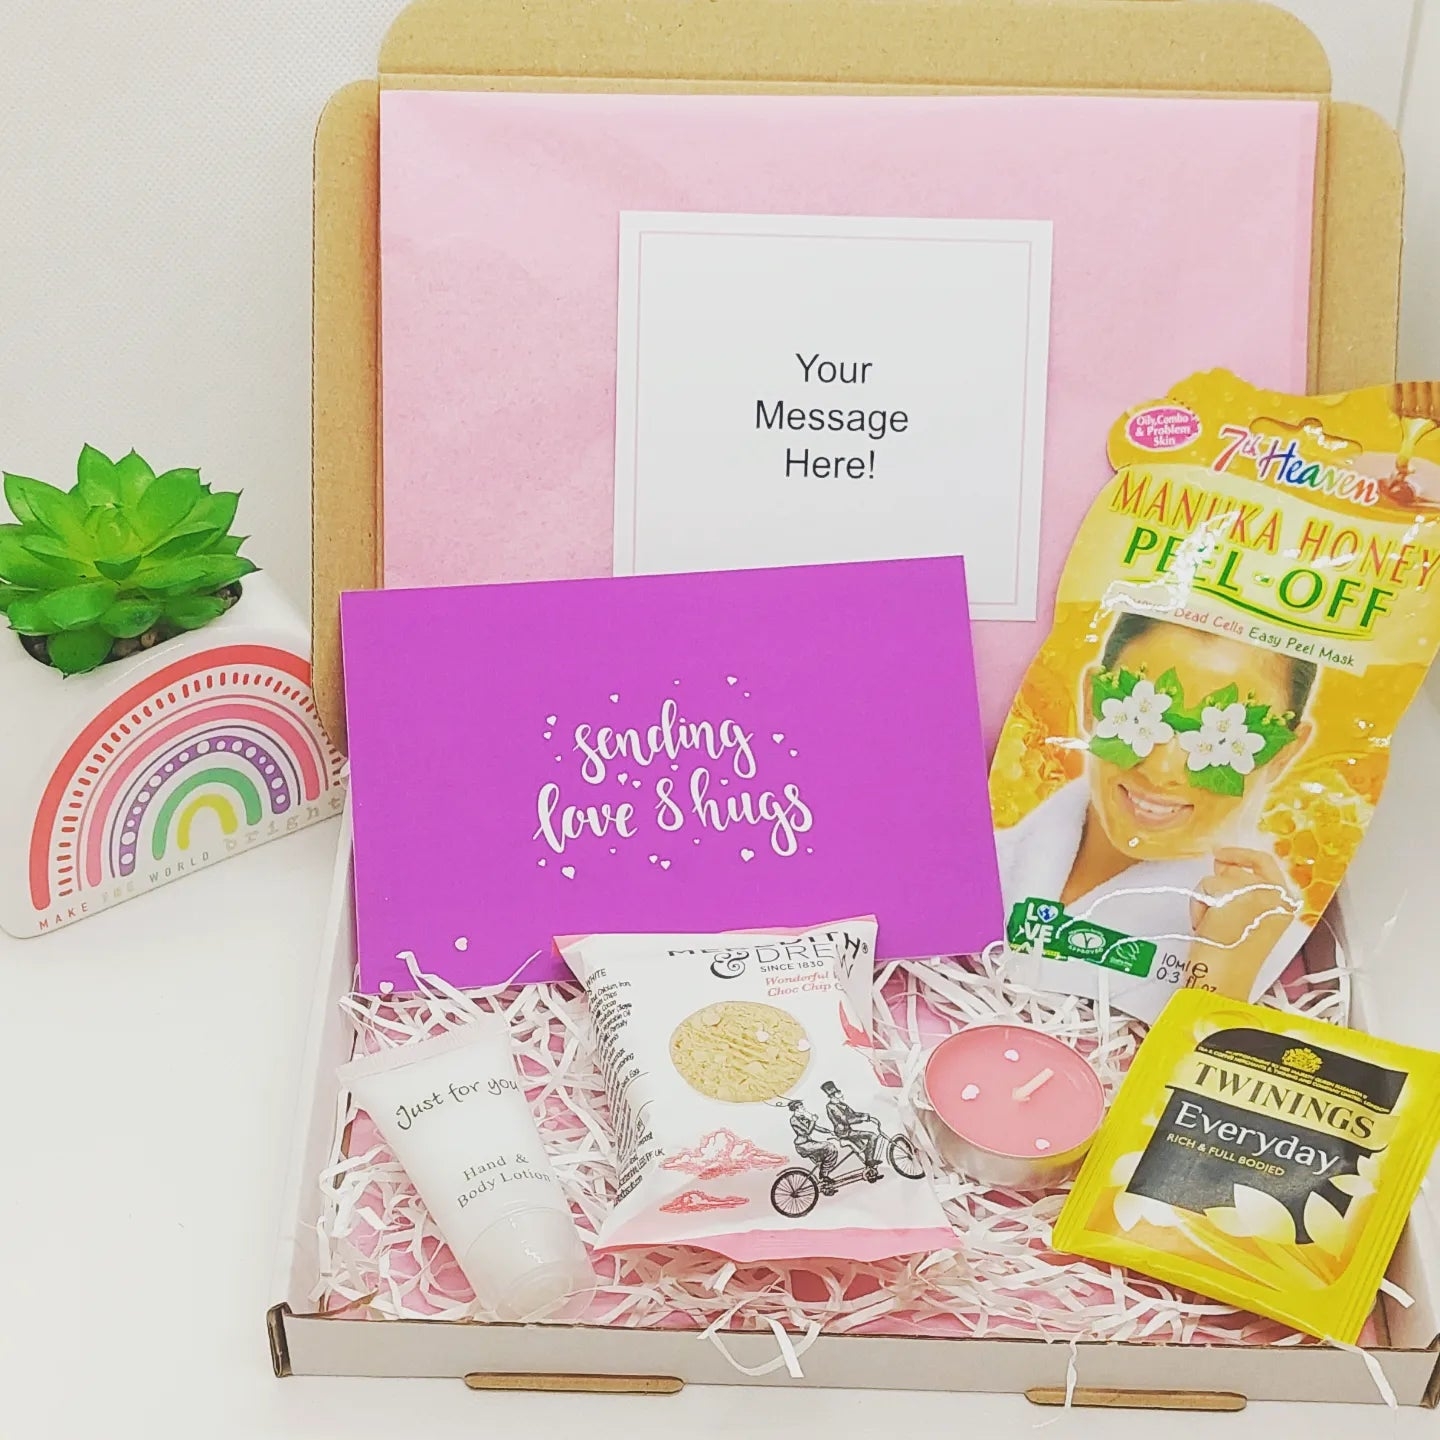 Mini Pamper Letterbox Gift – The Happiness Box